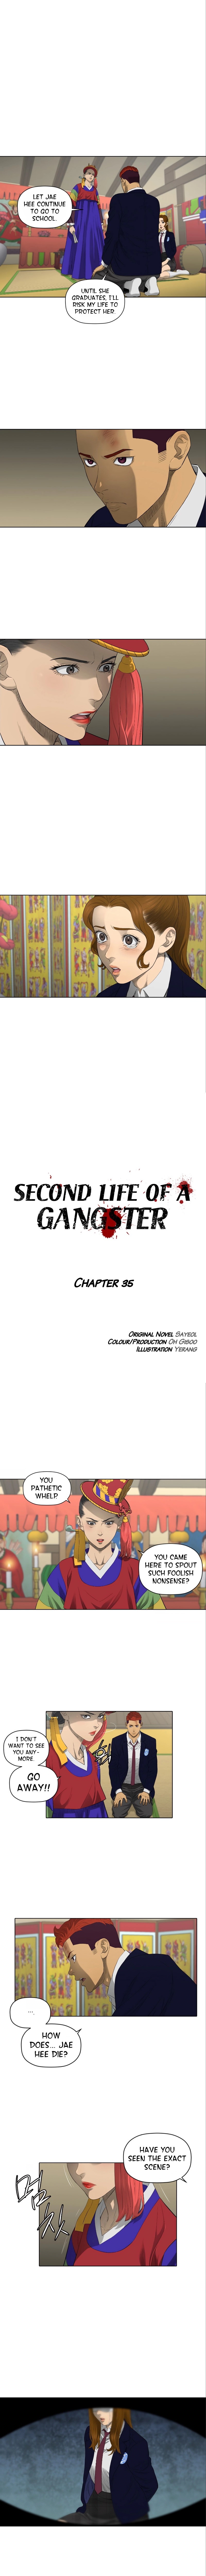 Second life of a Gangster image